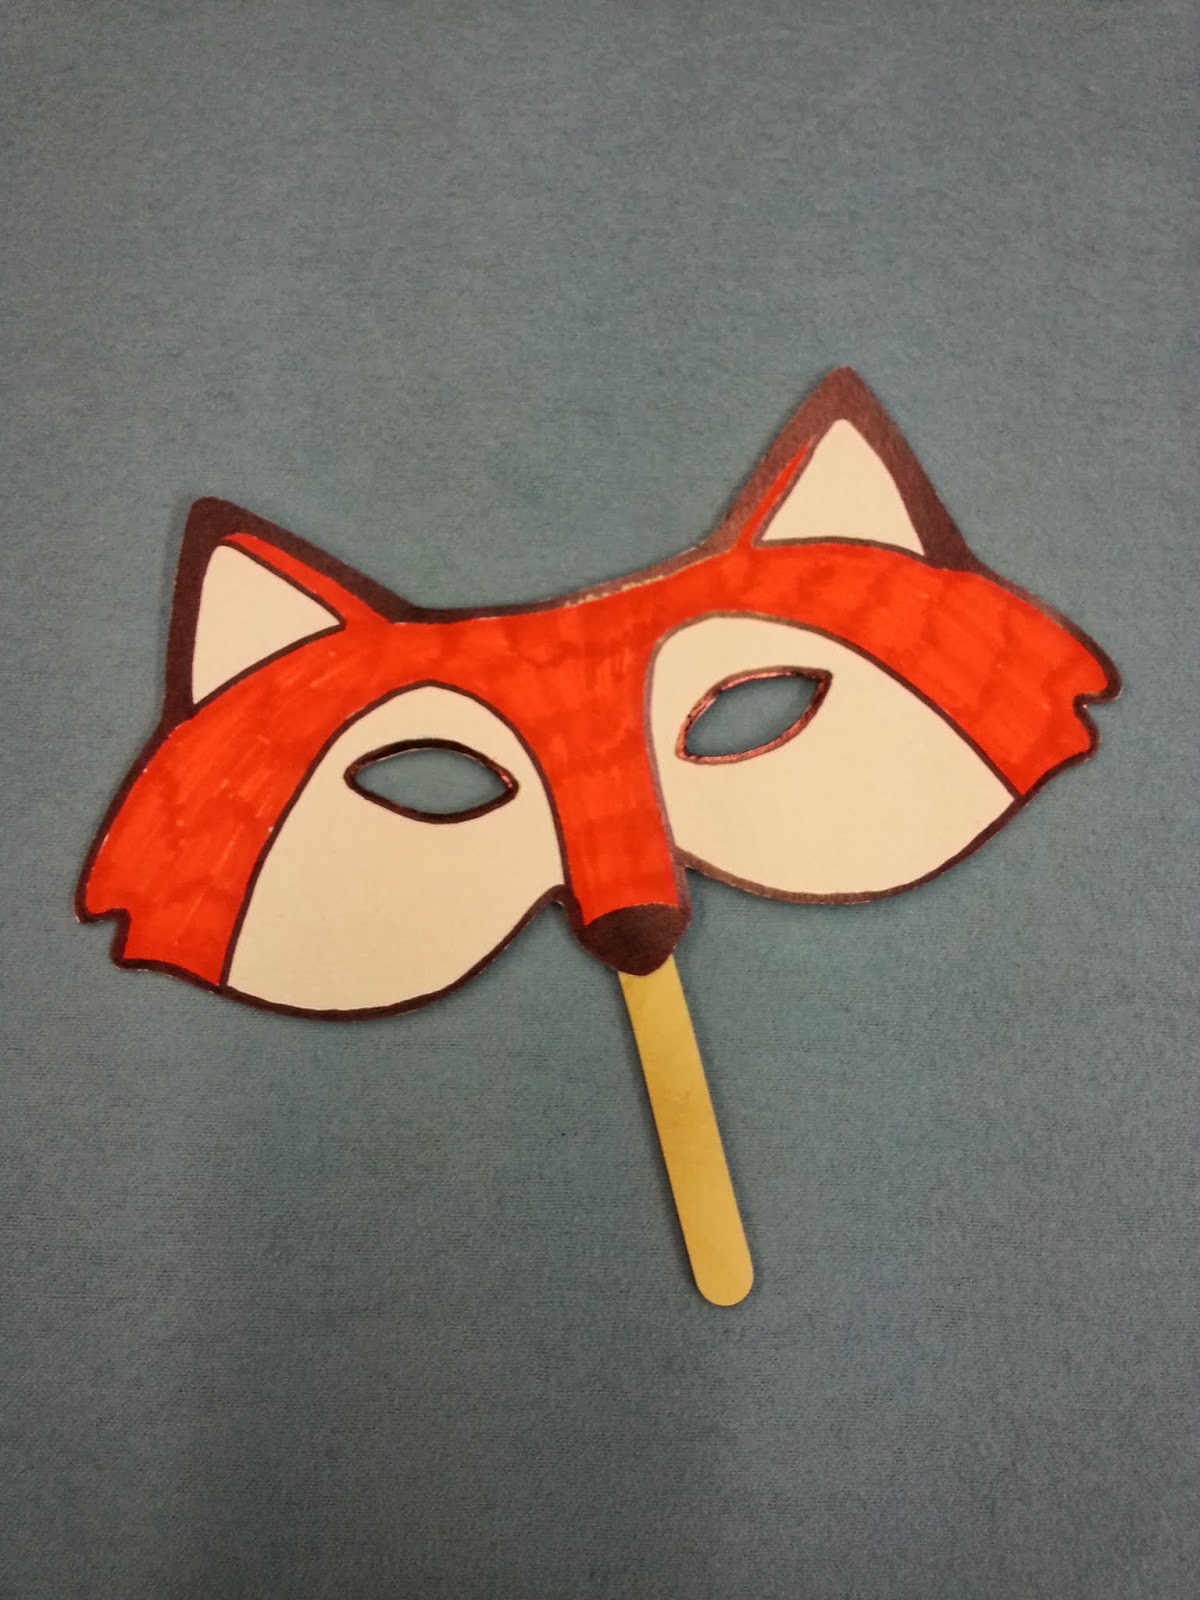 Library Village: Toddler Story Time - What Does the Fox Say?